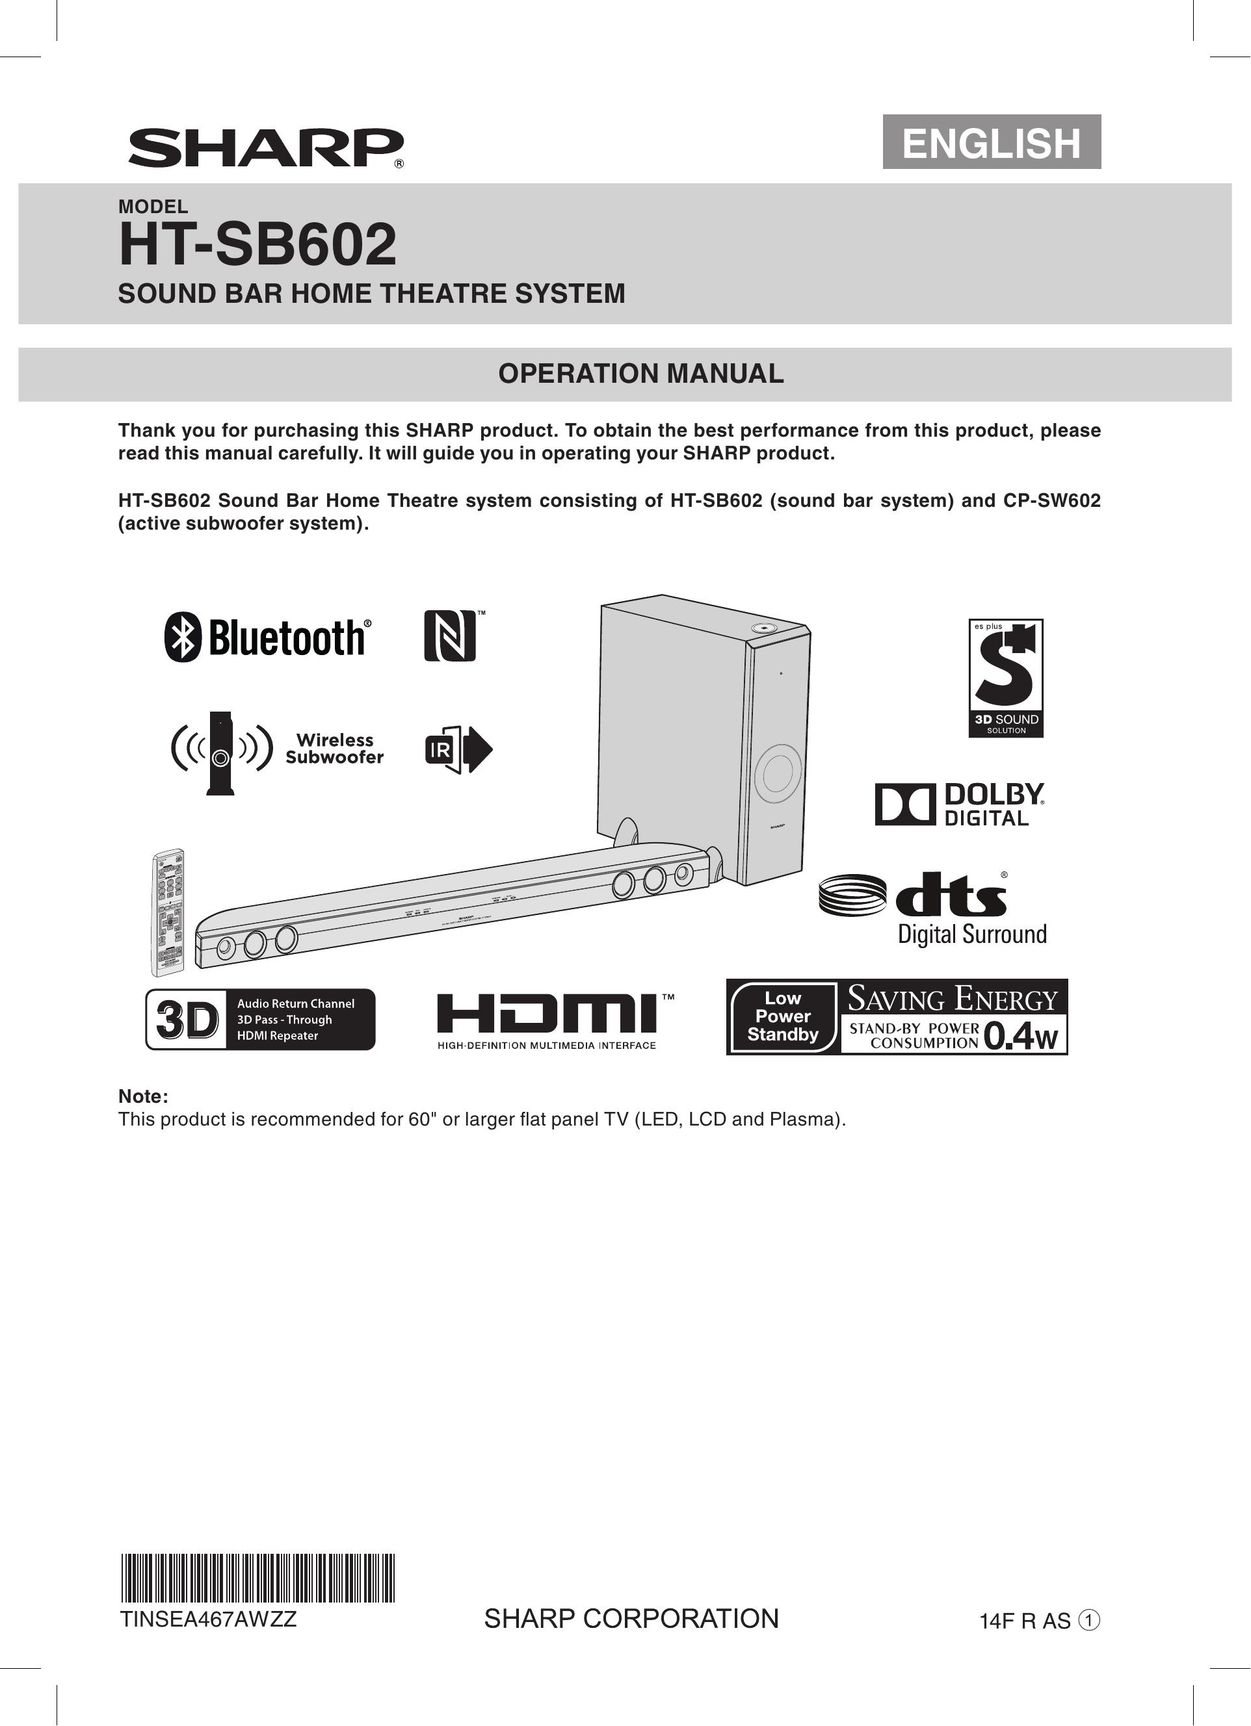 Sharp HT-SB602 Home Theater System User Manual